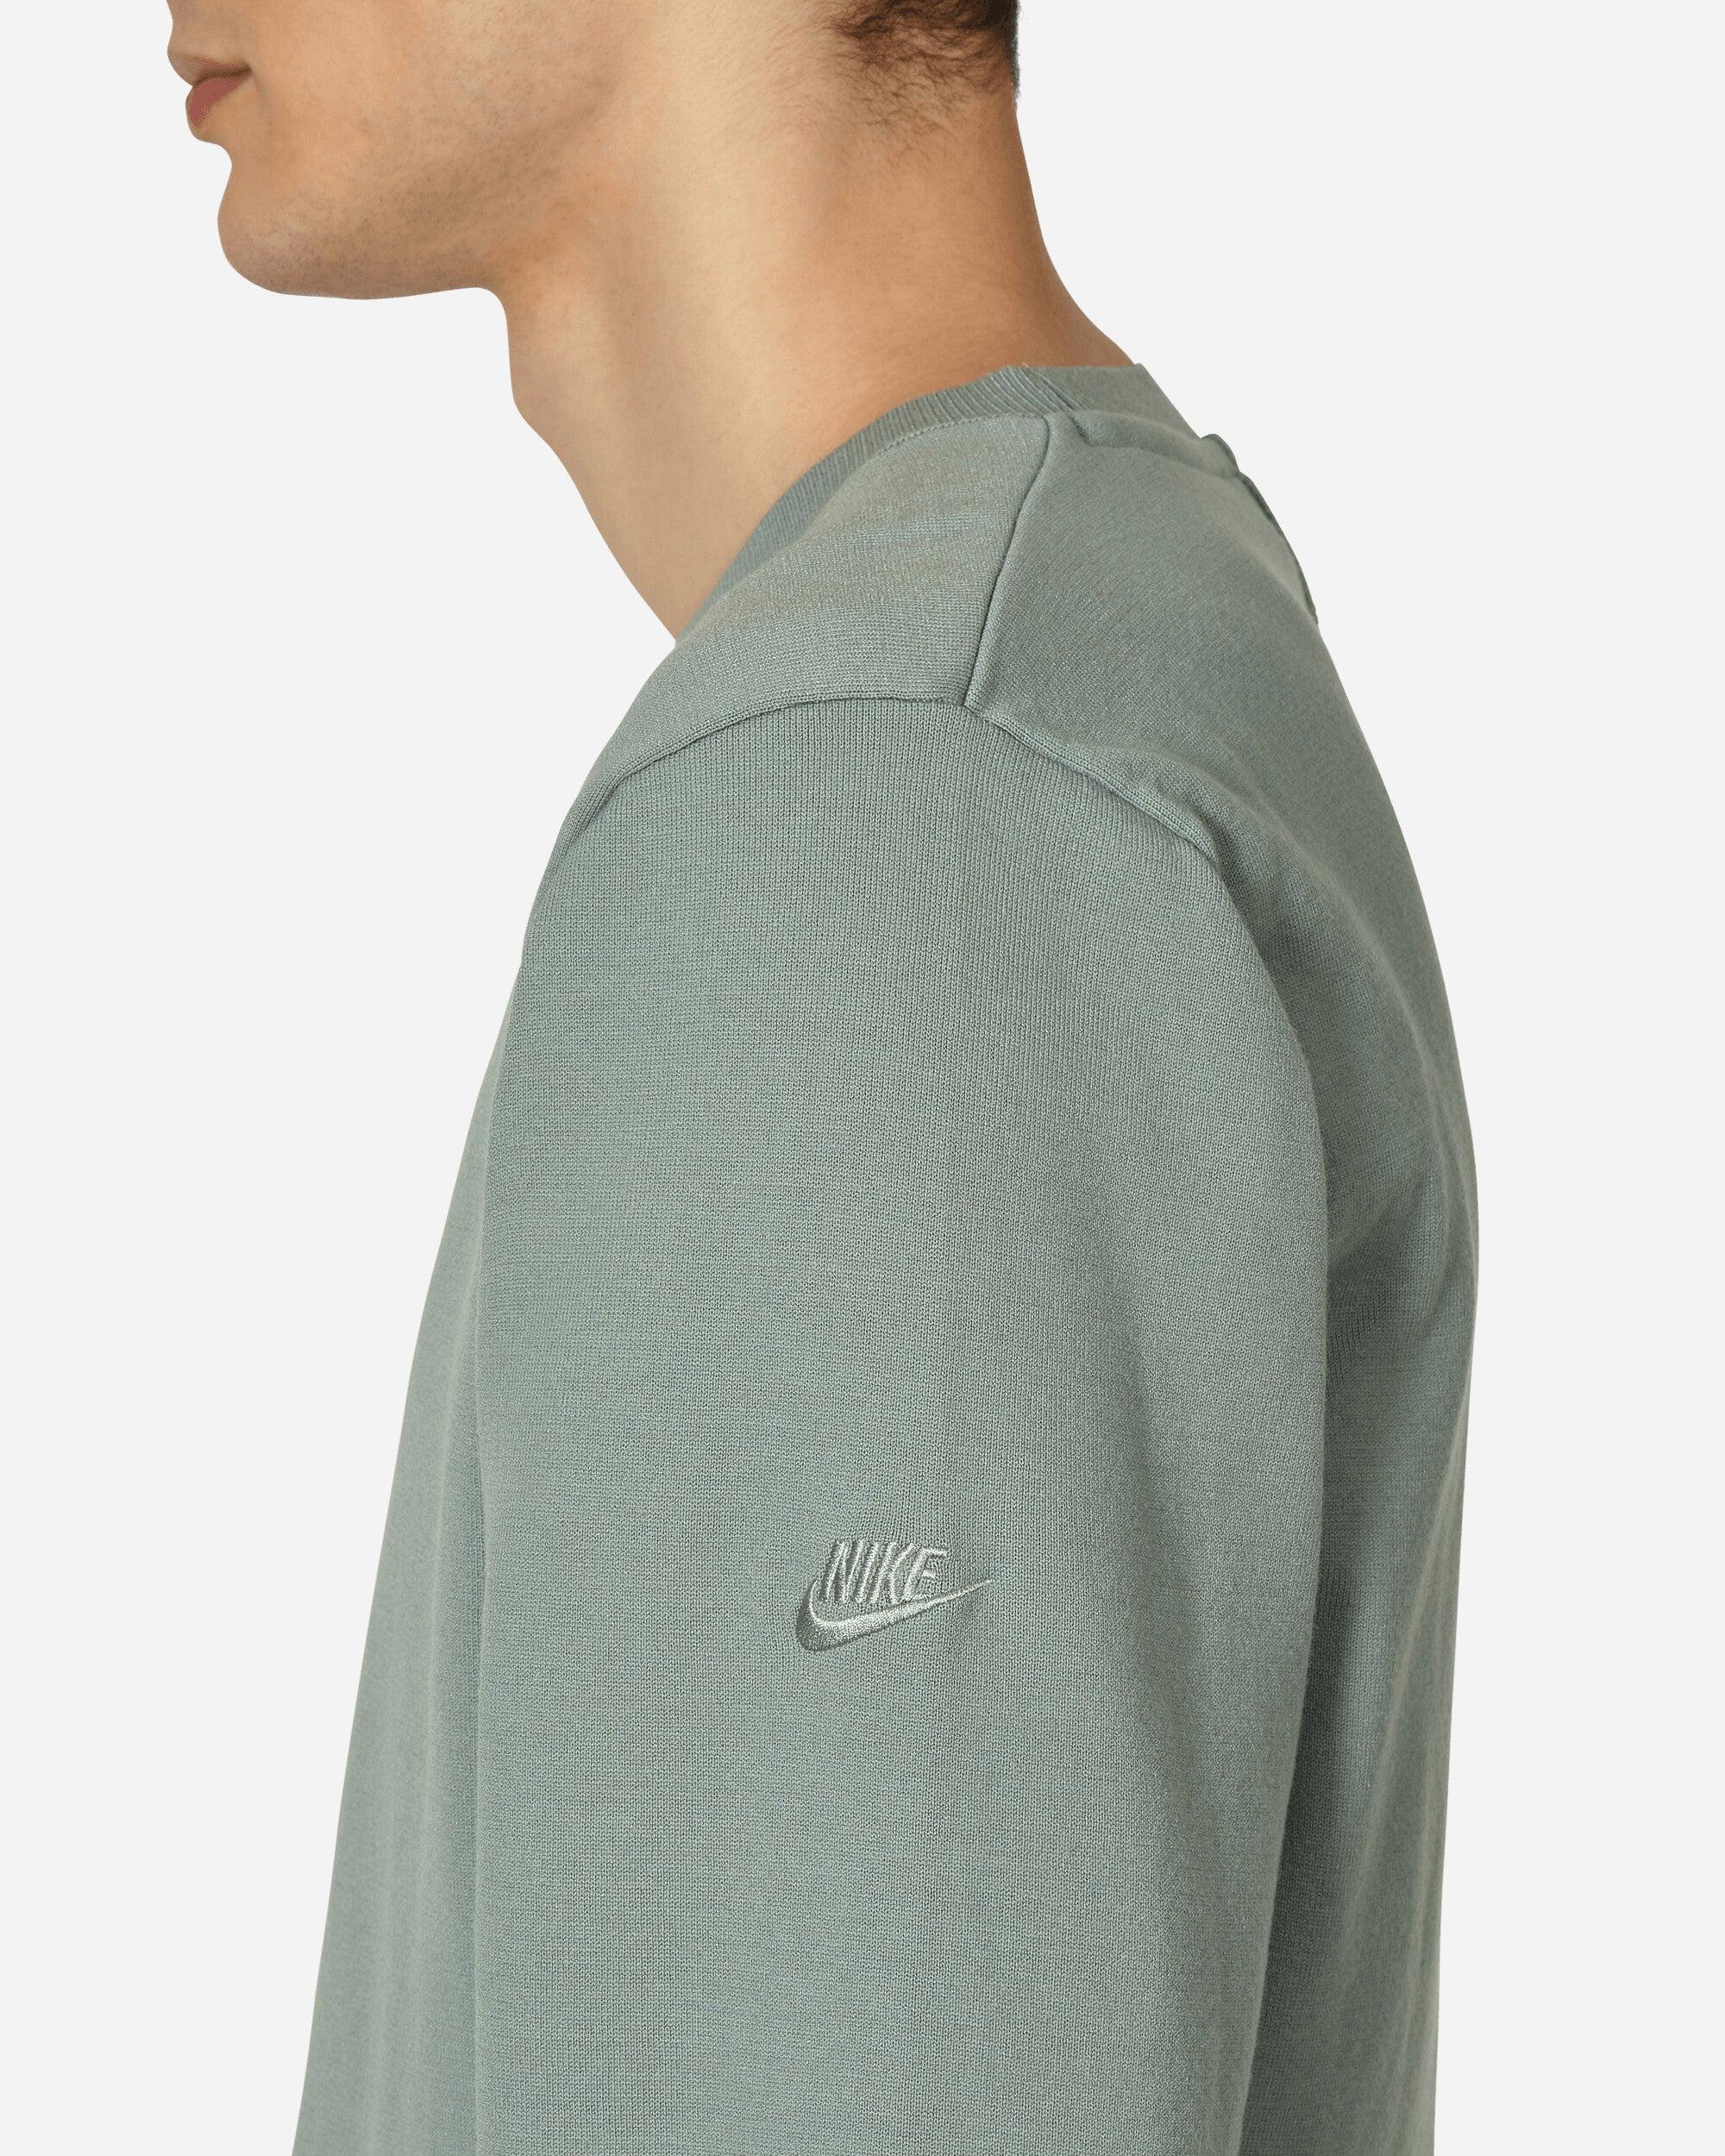 Nike Therma-fit Adv Tech Pack Engineered Tech Crewneck Sweatshirt Green for Men Lyst